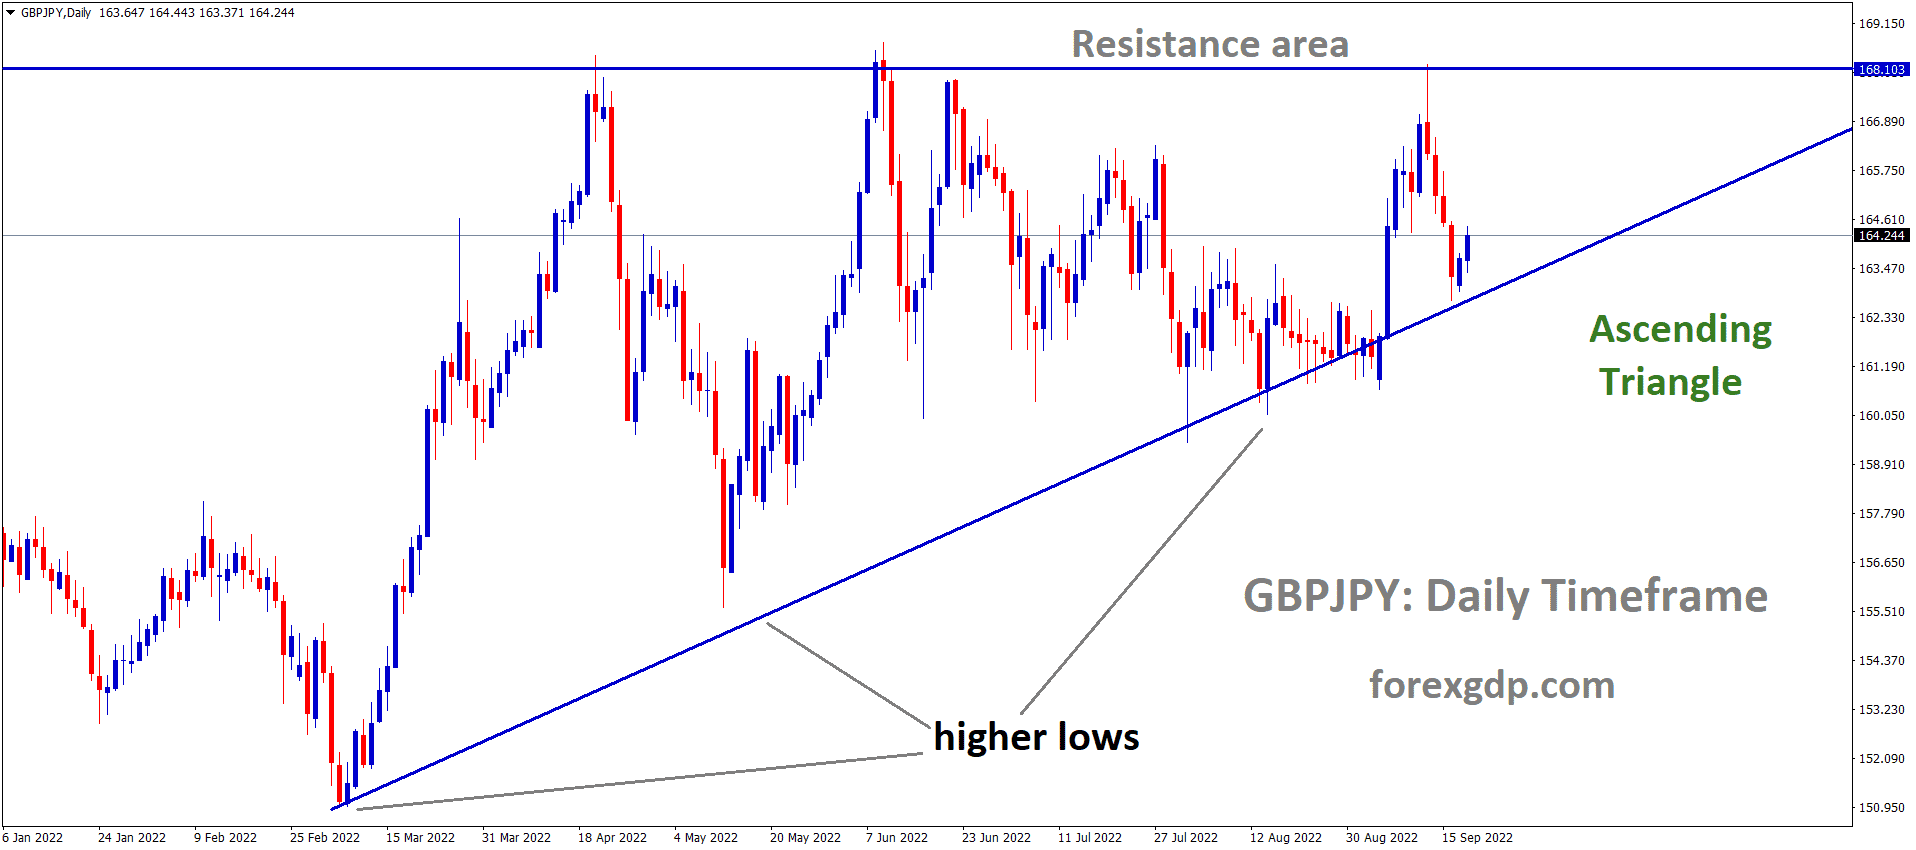 GBPJPY is moving in an Ascending triangle pattern and the market has rebounded from the higher low area of the Ascending triangle pattern.